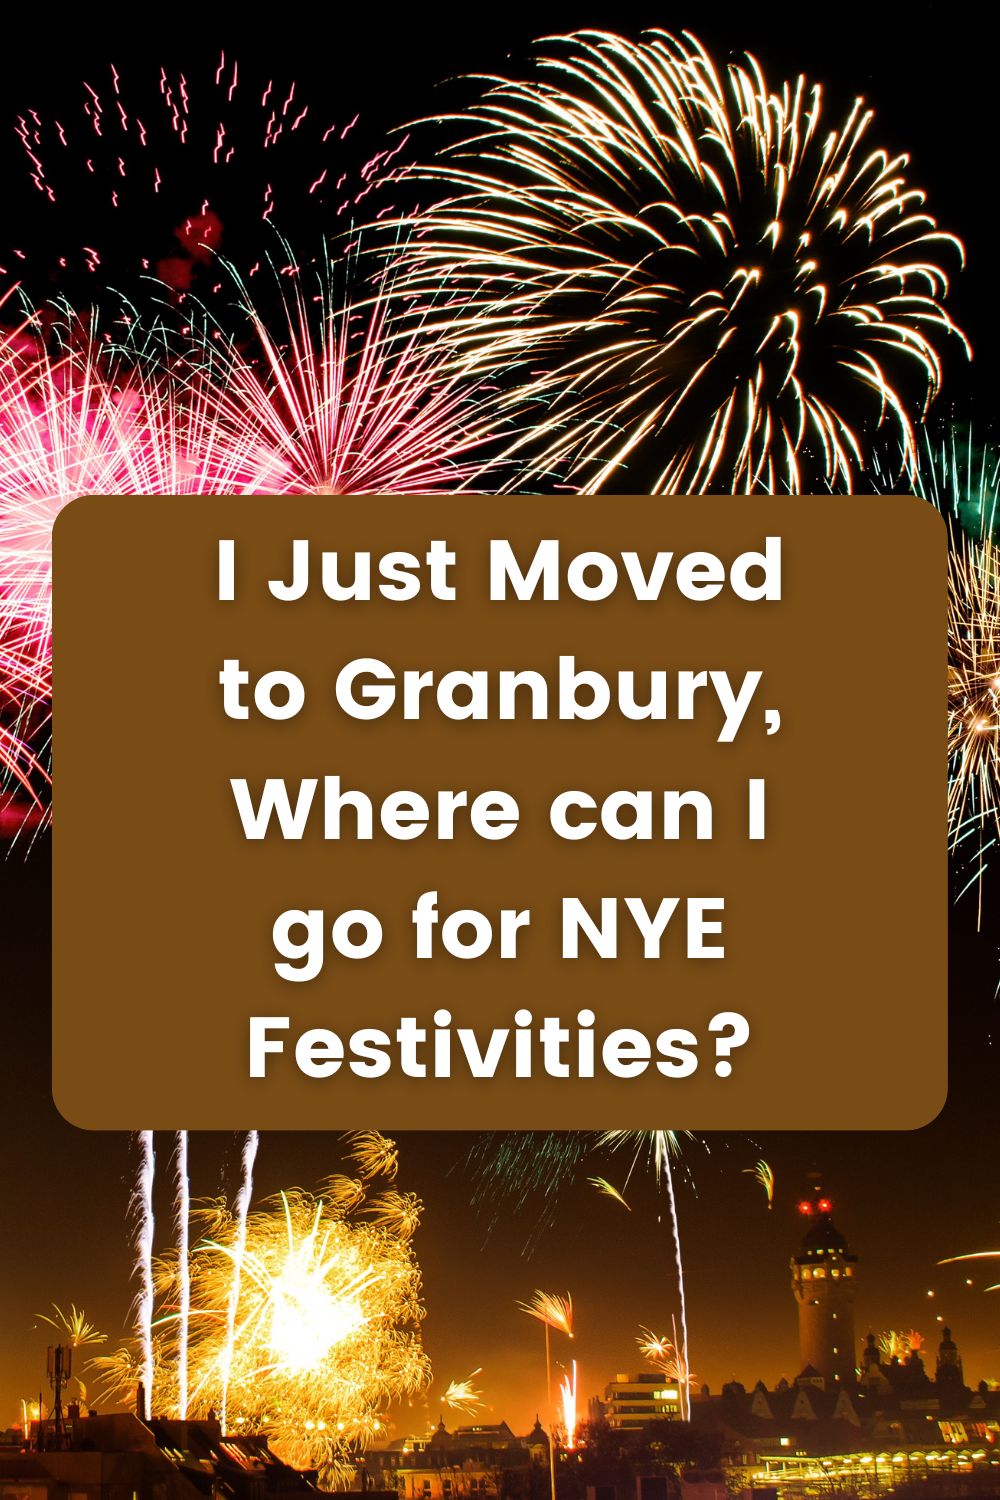 I Just Moved to Granbury, Where can I go for NYE Festivities?